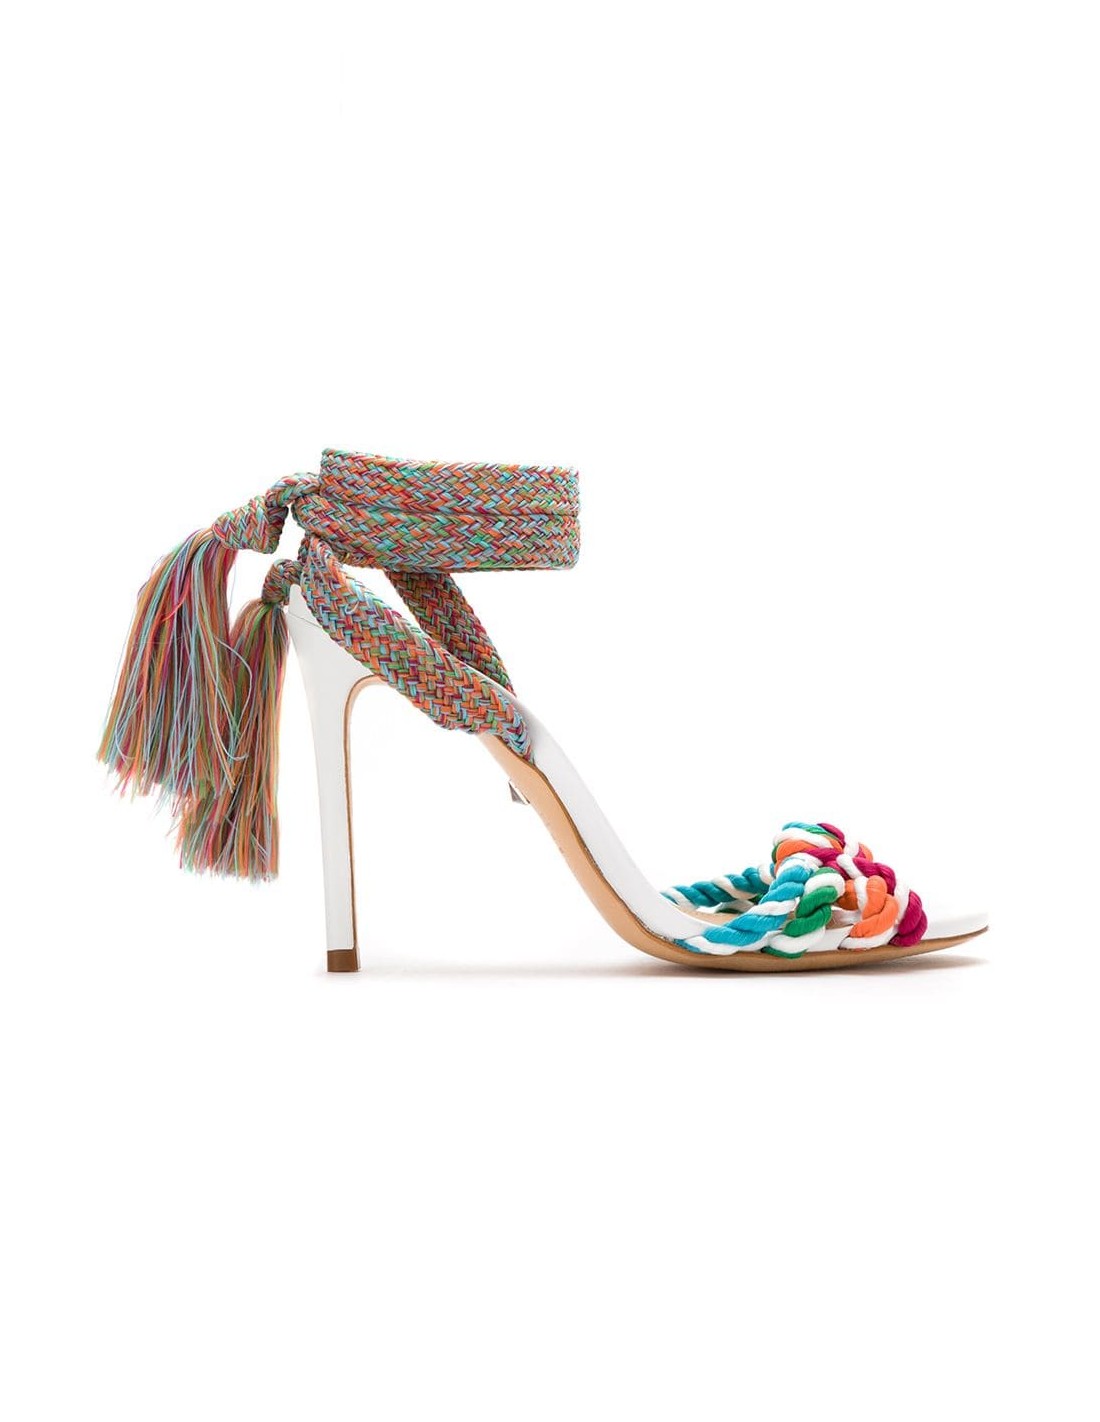 Schutz Sandals with Heel, Strings Knots and